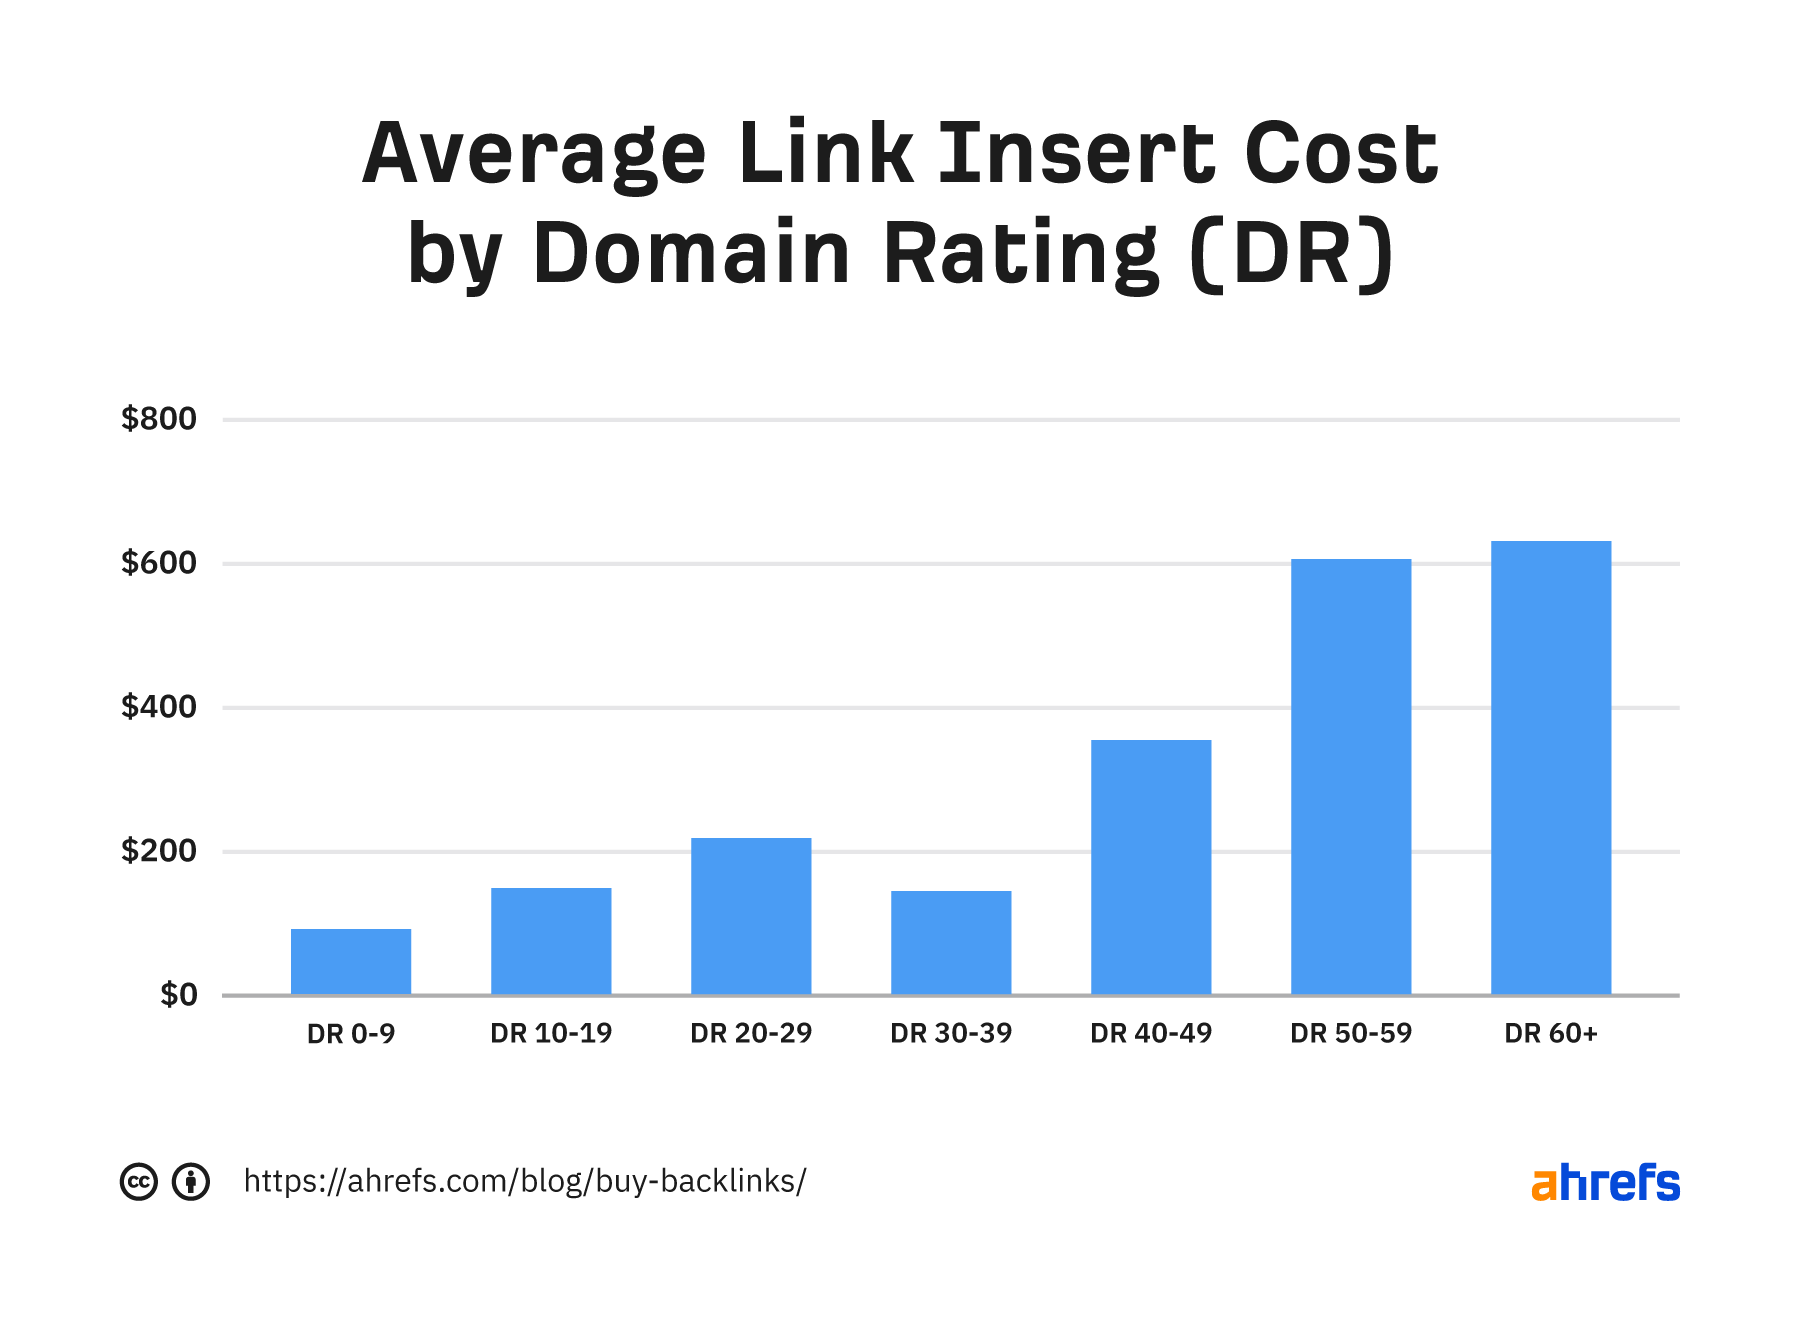 Average link insert cost by Domain Rating (DR)
